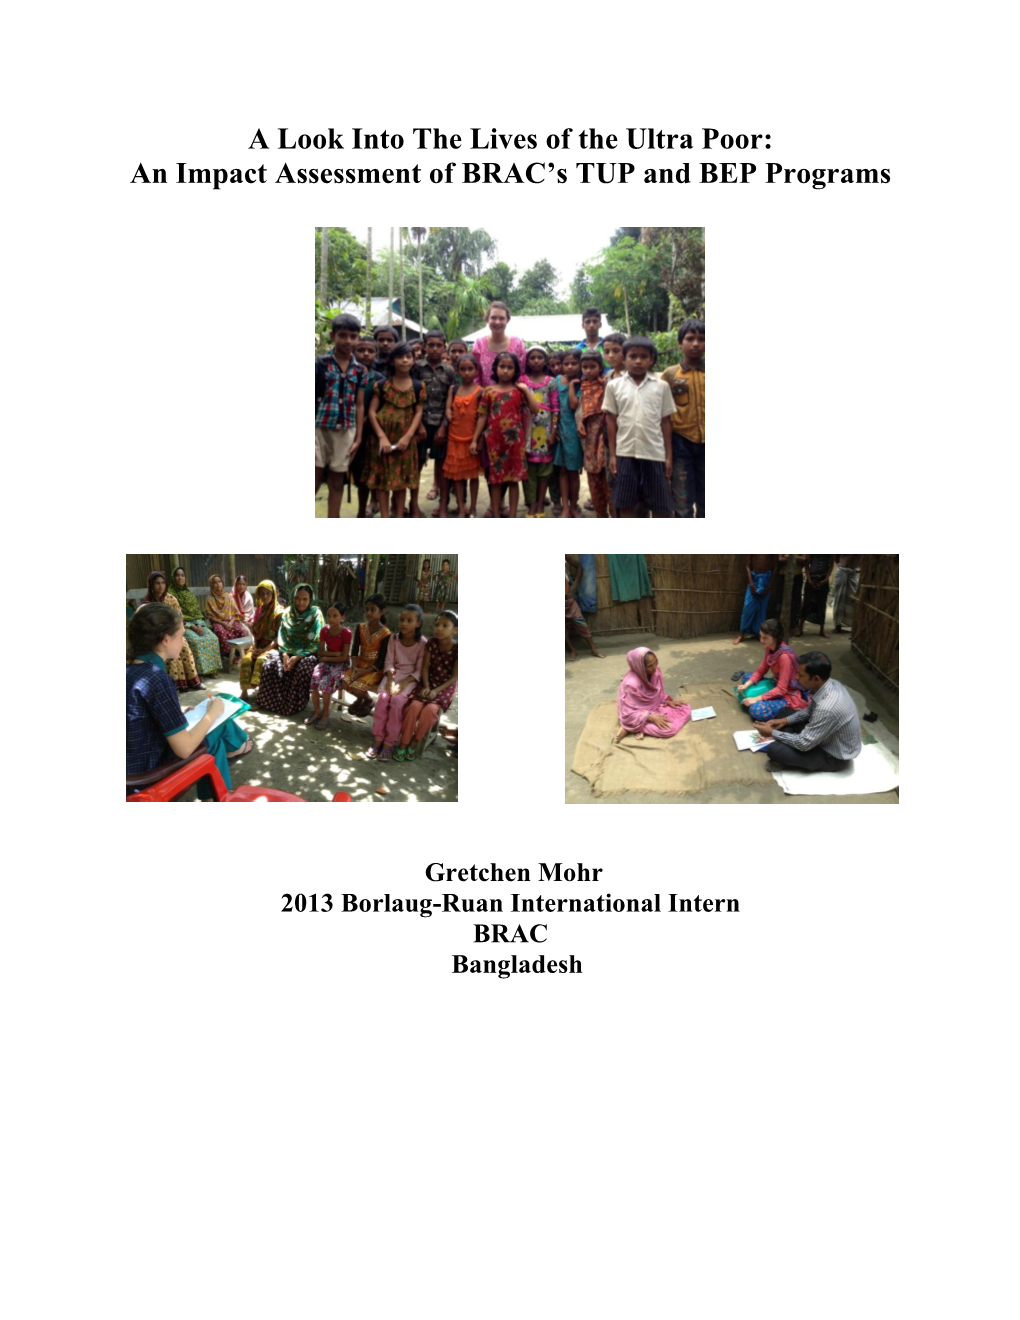 A Look Into the Lives of the Ultra Poor: an Impact Assessment of BRAC's TUP and BEP Programs